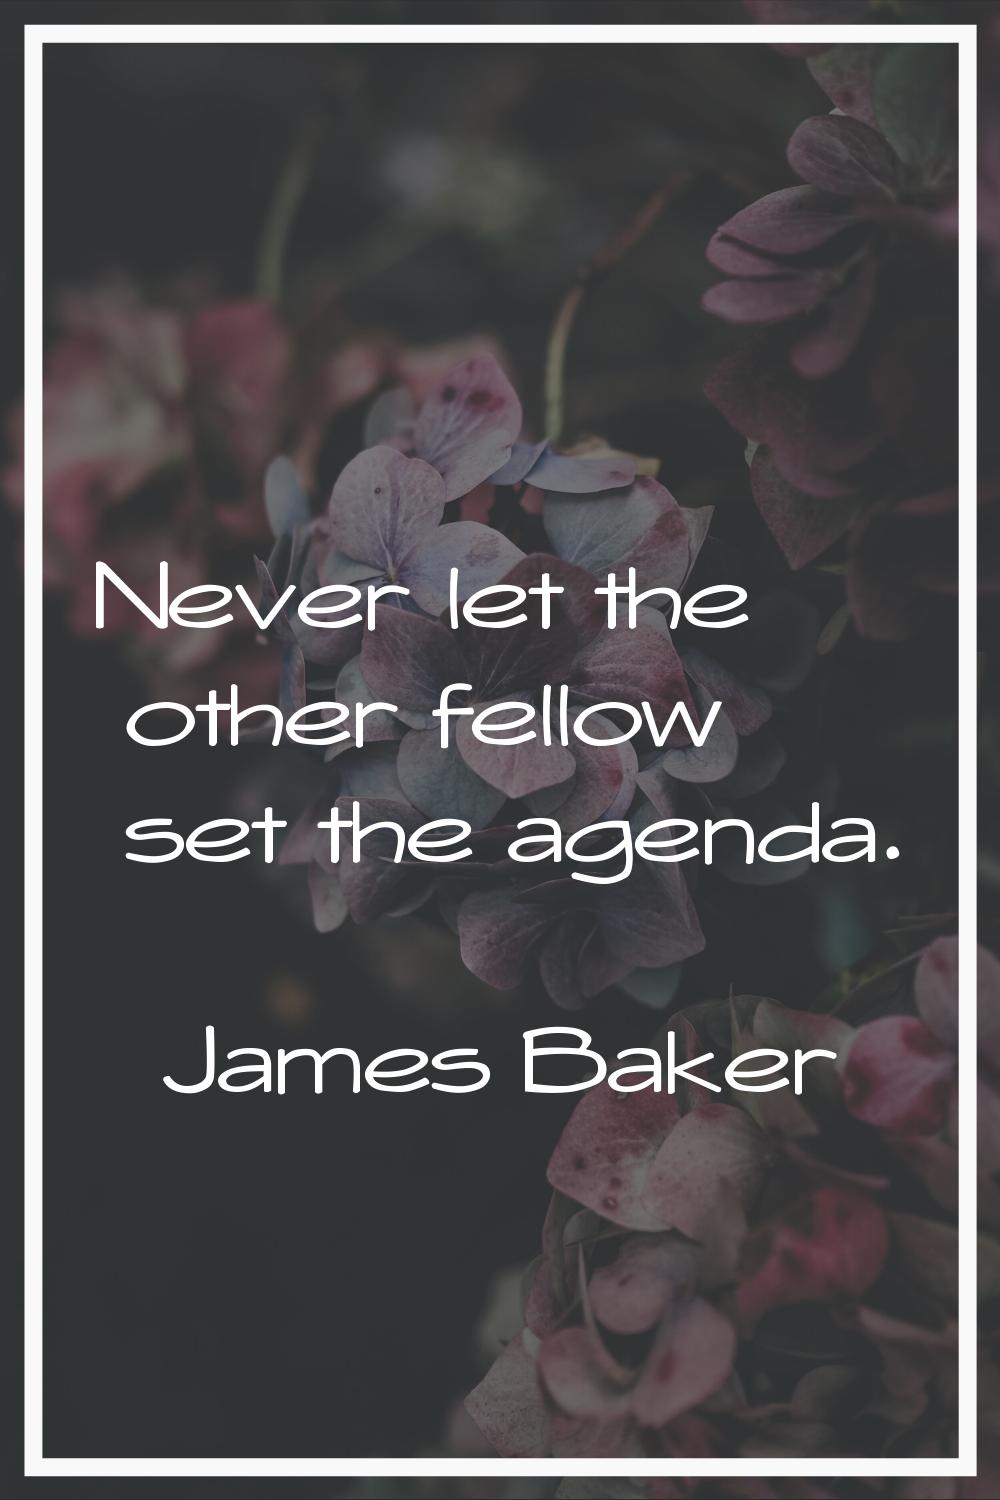 Never let the other fellow set the agenda.